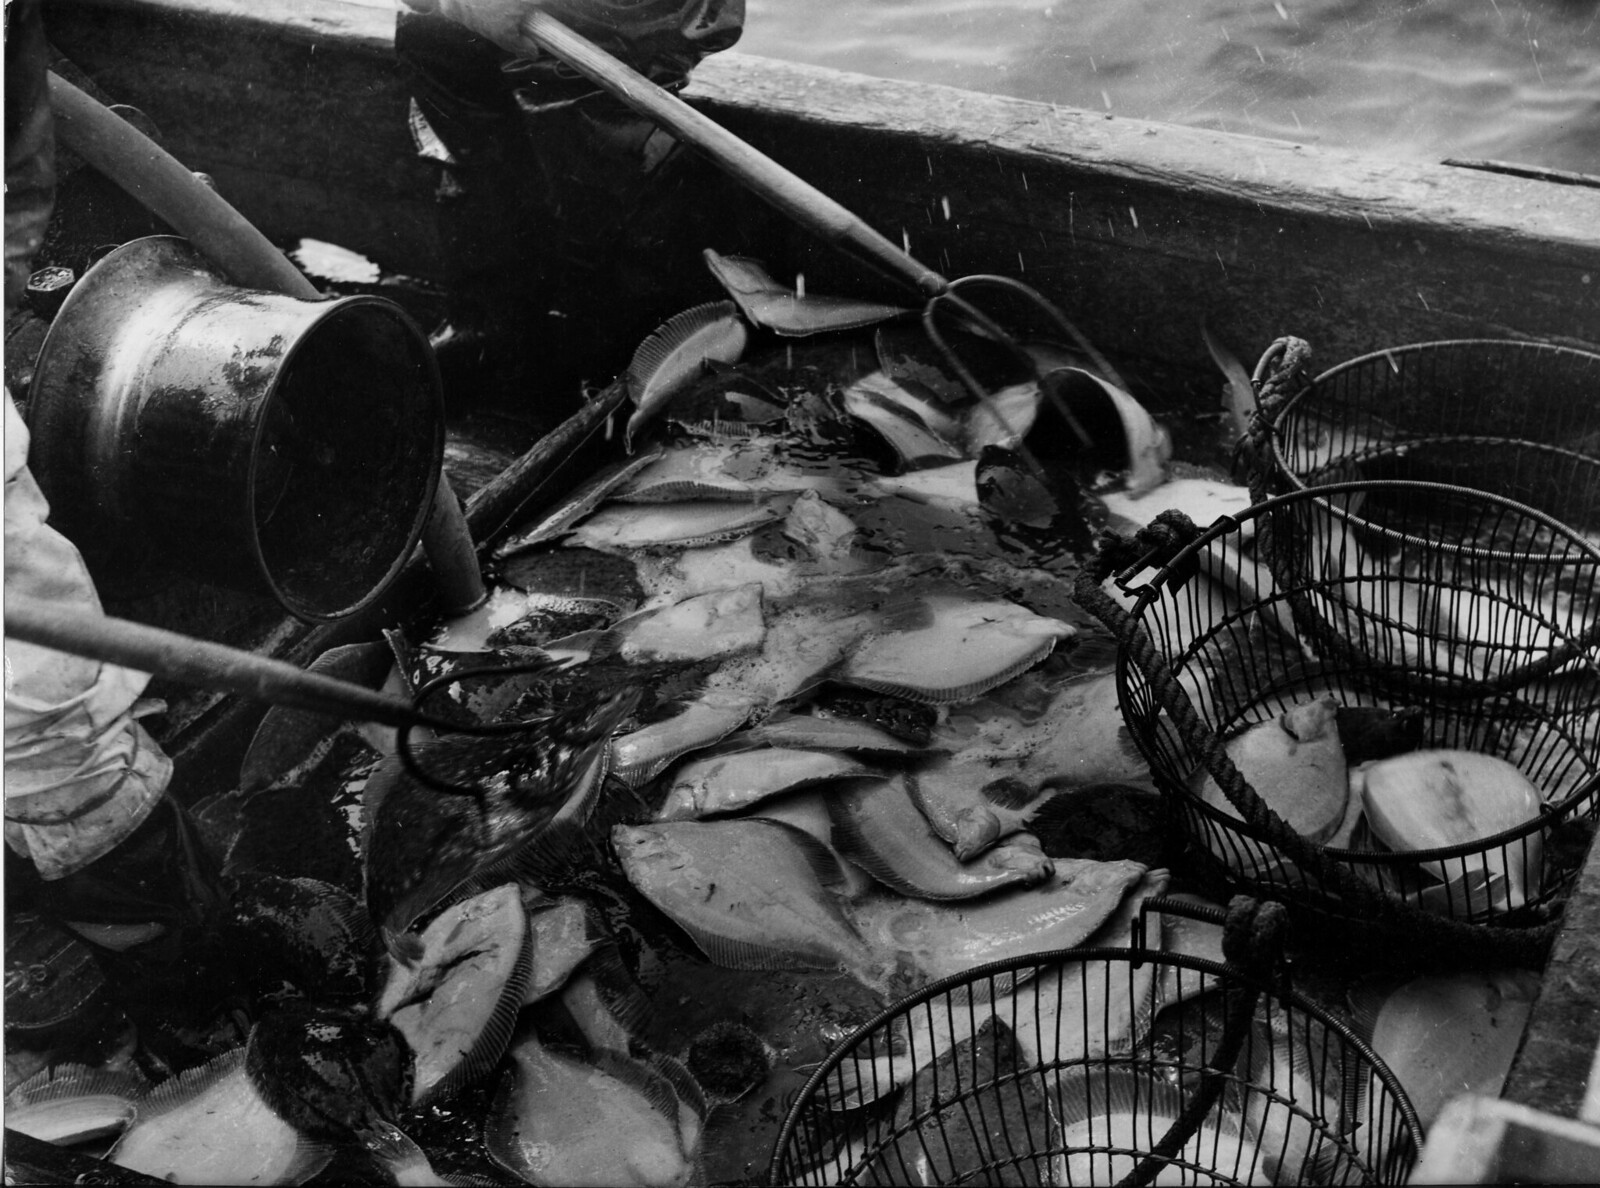 The catch of a dragnet trawler